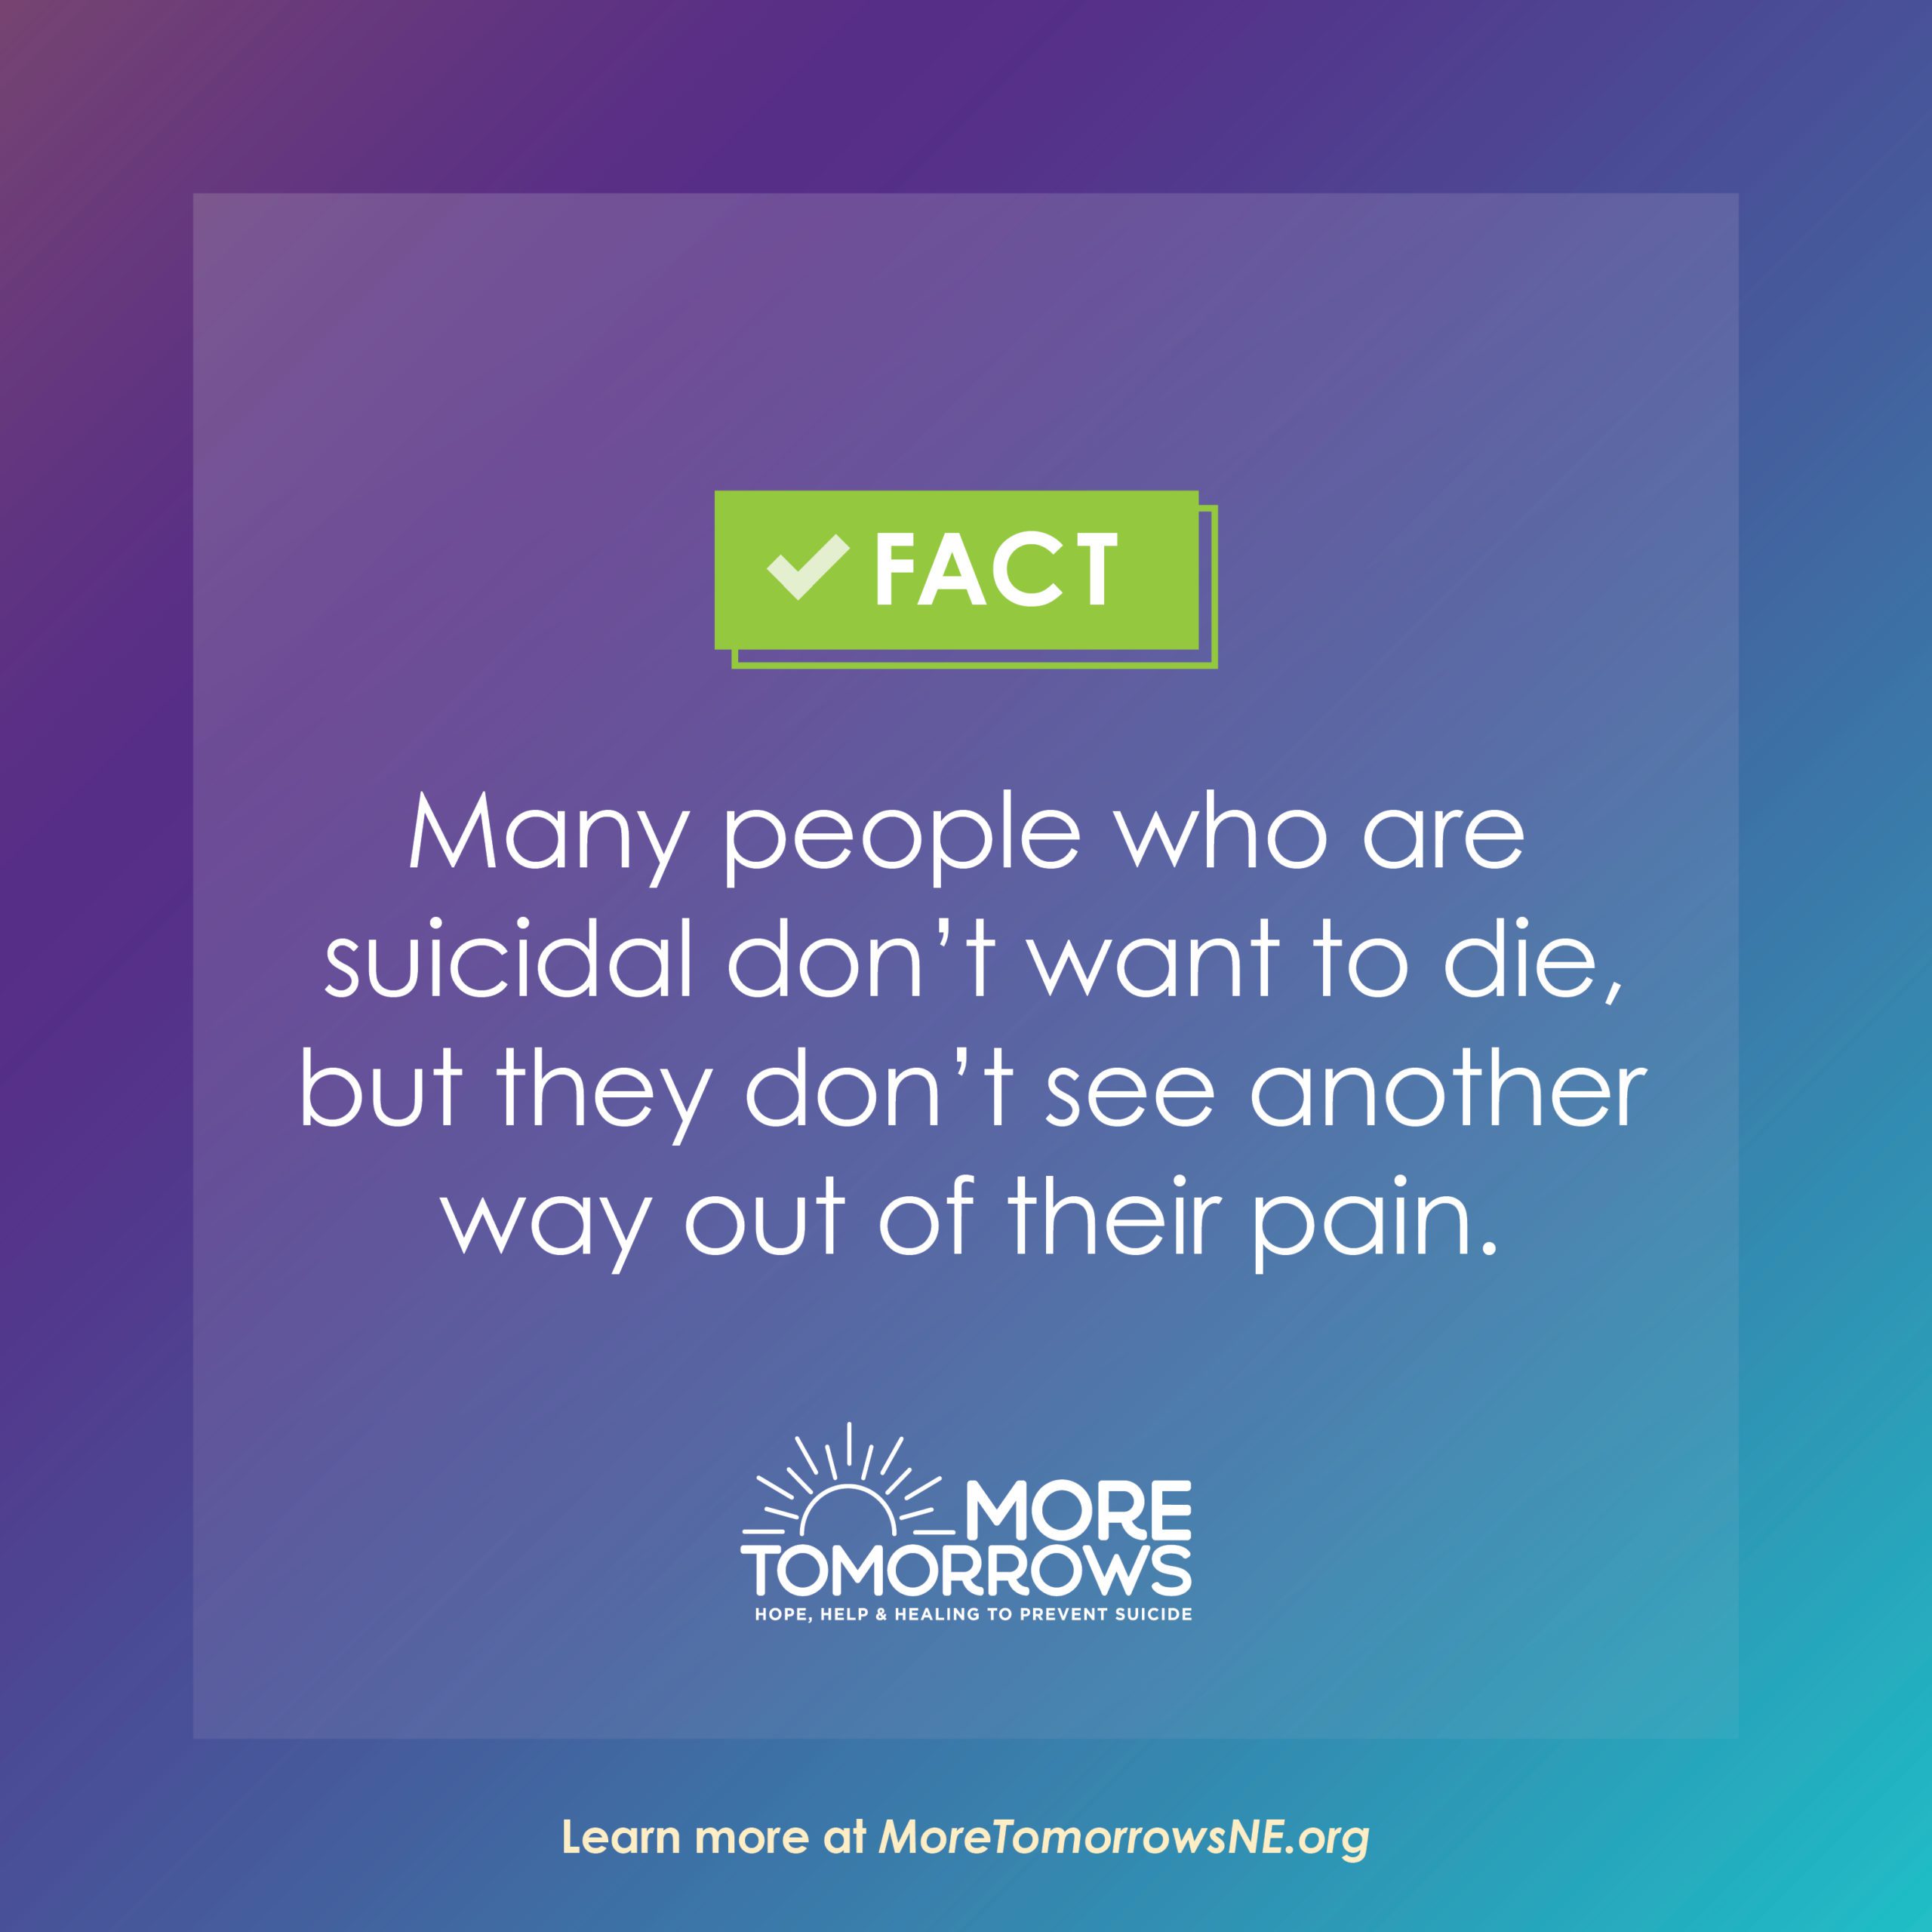 I Want To Kill Myself Suicide Prevention Community Toolkit - The Kim Foundation